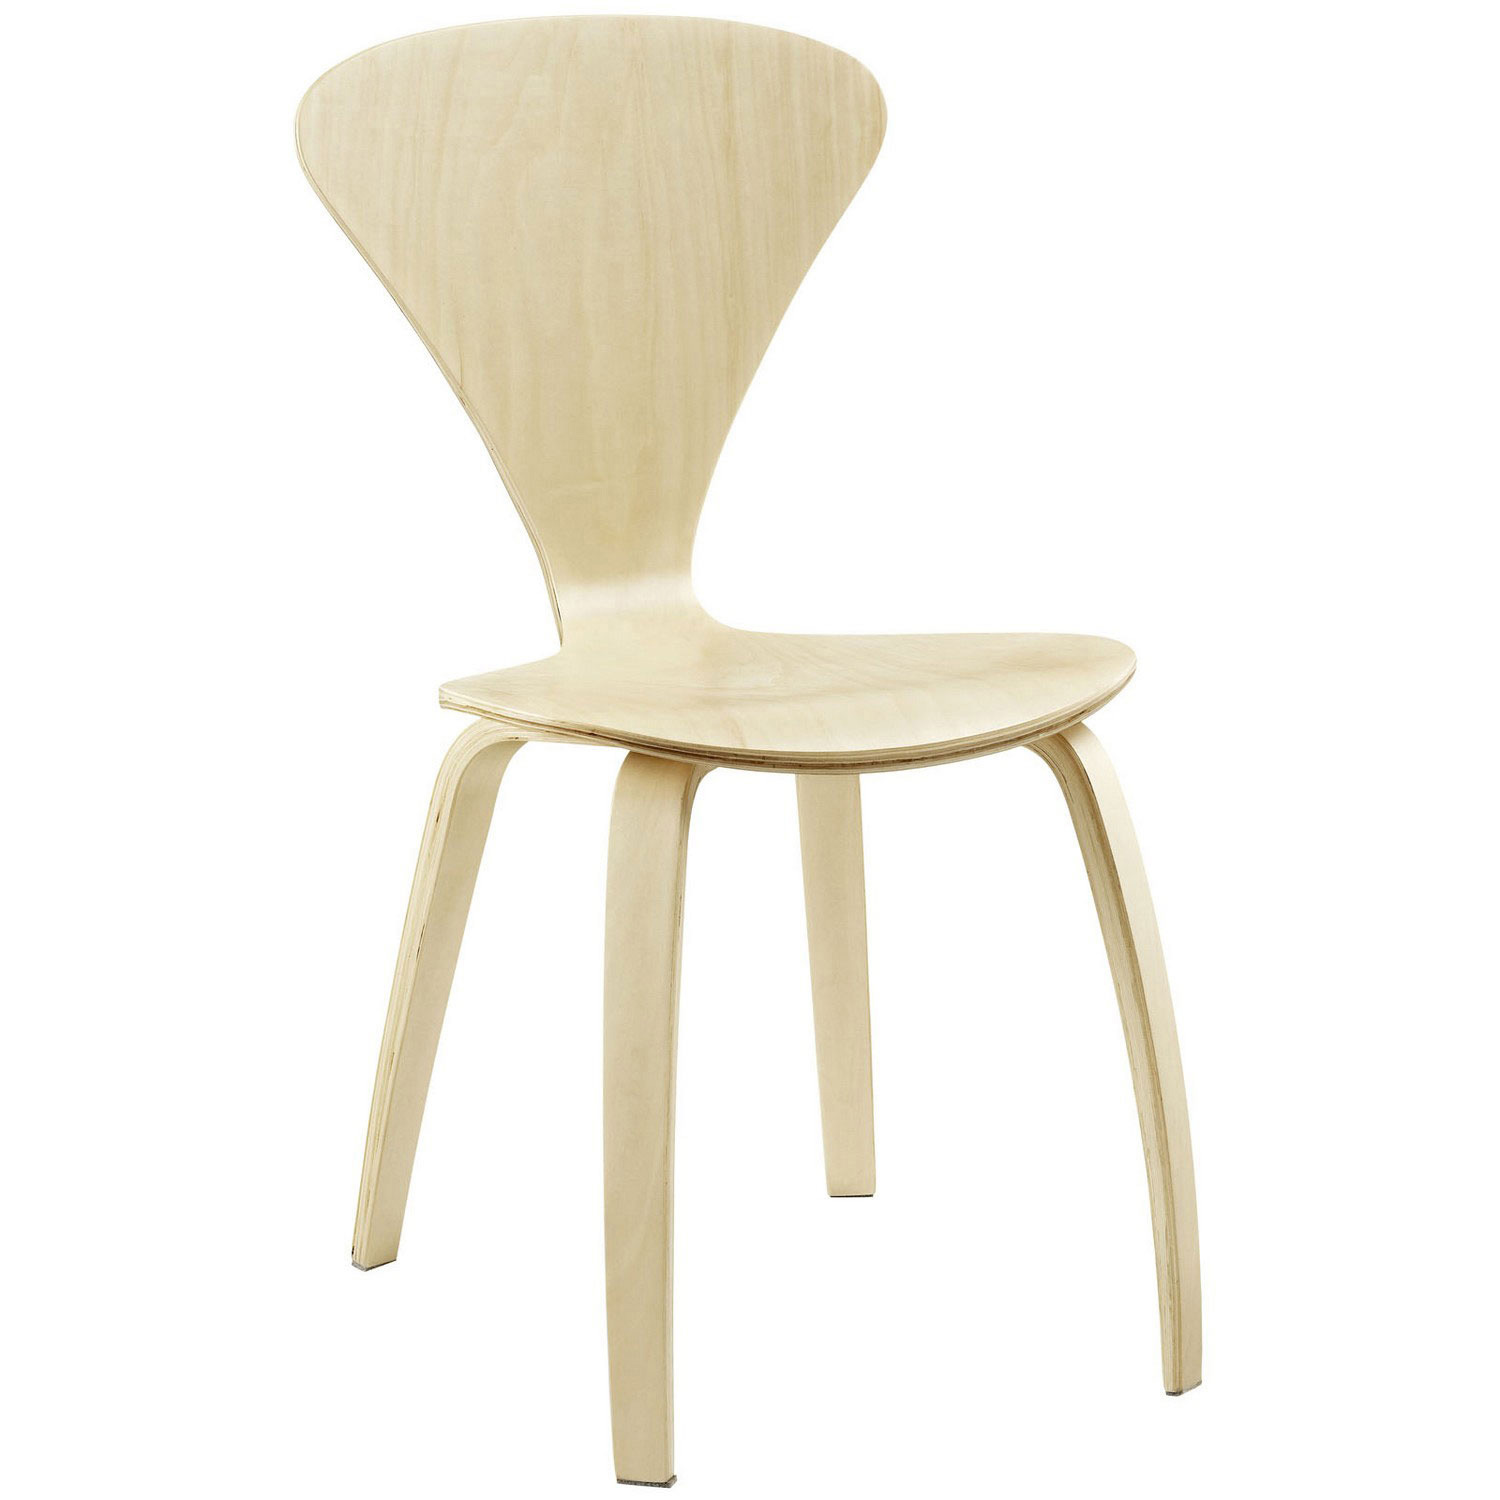 Modway Vortex Dining Side Chair - Natural